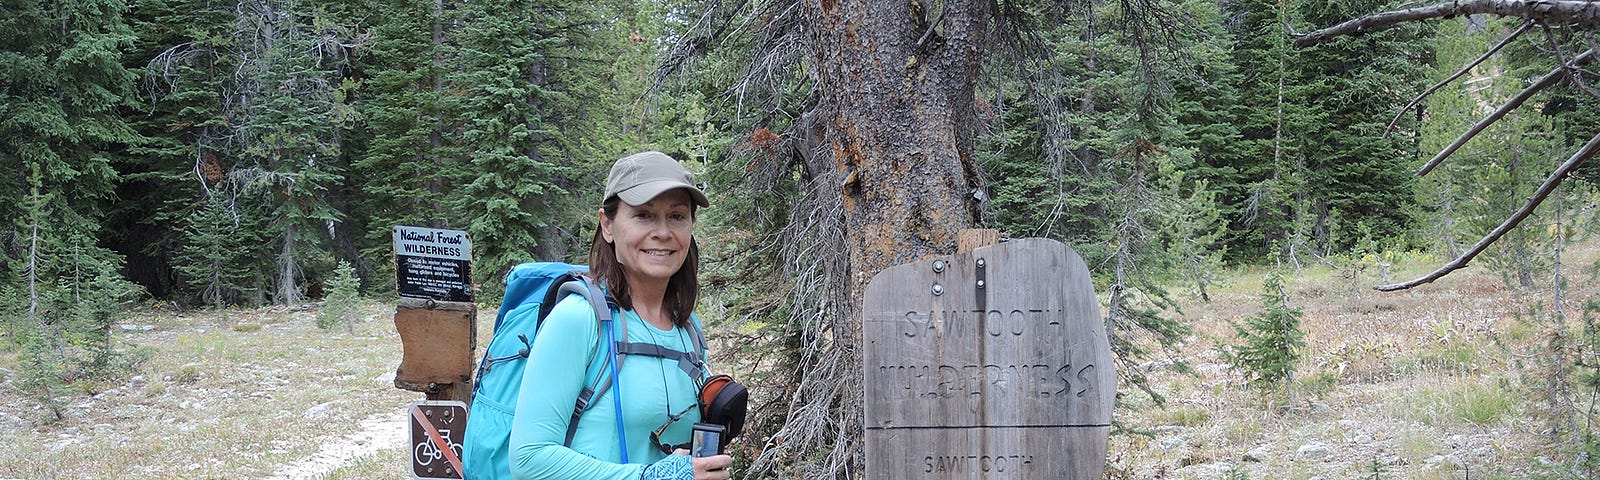 Kristin Simanek, FWS Artist and Senior Graphic Designer at the National Conservation Training Center, hiking in the Sawtooth Wilderness of Idaho.